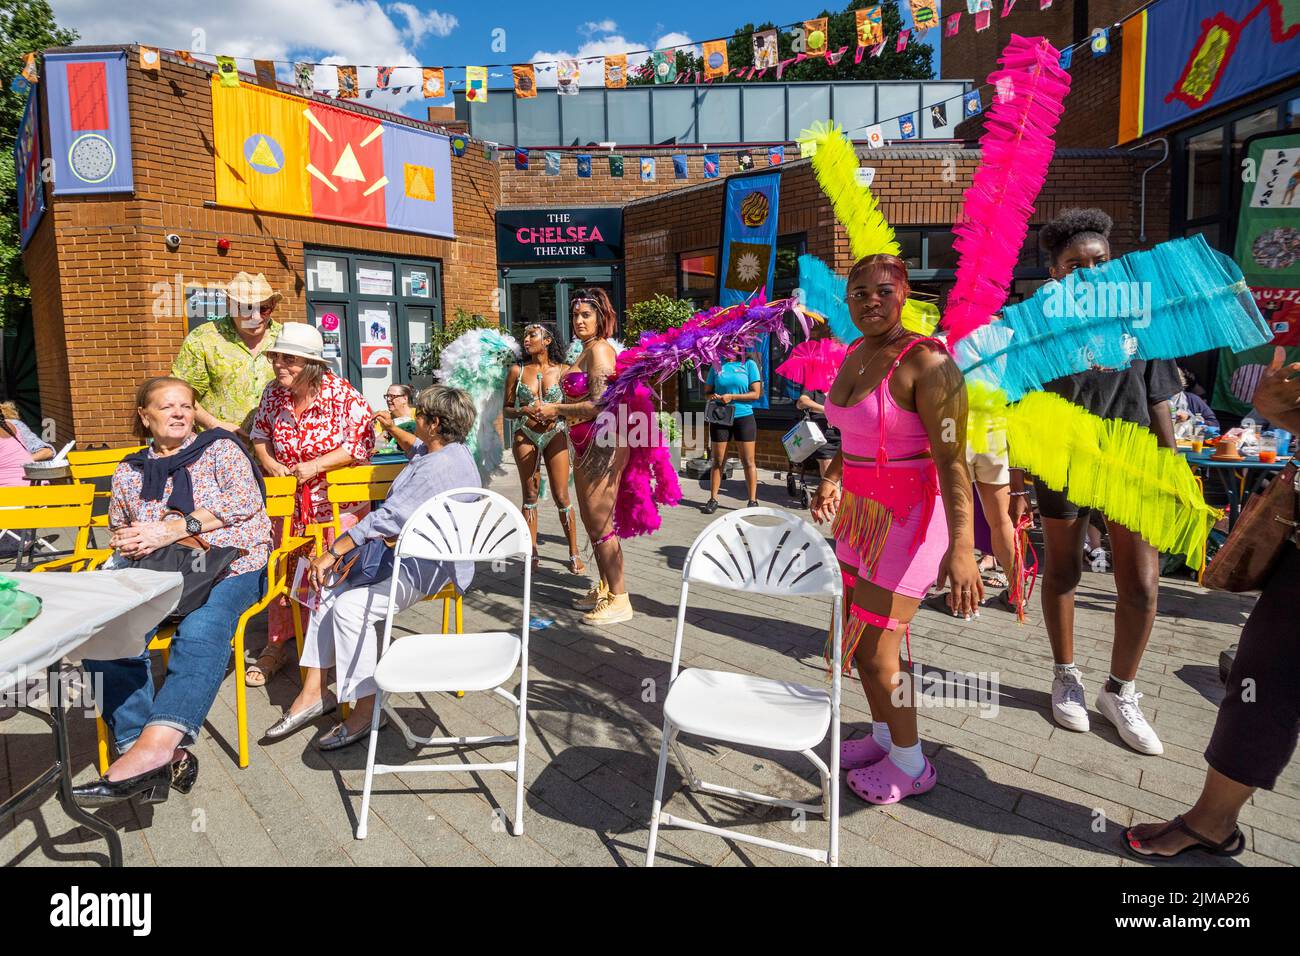 London, UK.  5 August 2022. Members of Funatiks costumes at Carnival in Chelsea, an event showcasing carnival costumes, music and culture.  The show is outside The Chelsea Theatre and is part of this year’s Kensington & Chelsea Festival. Credit: Stephen Chung / Alamy Live News Stock Photo